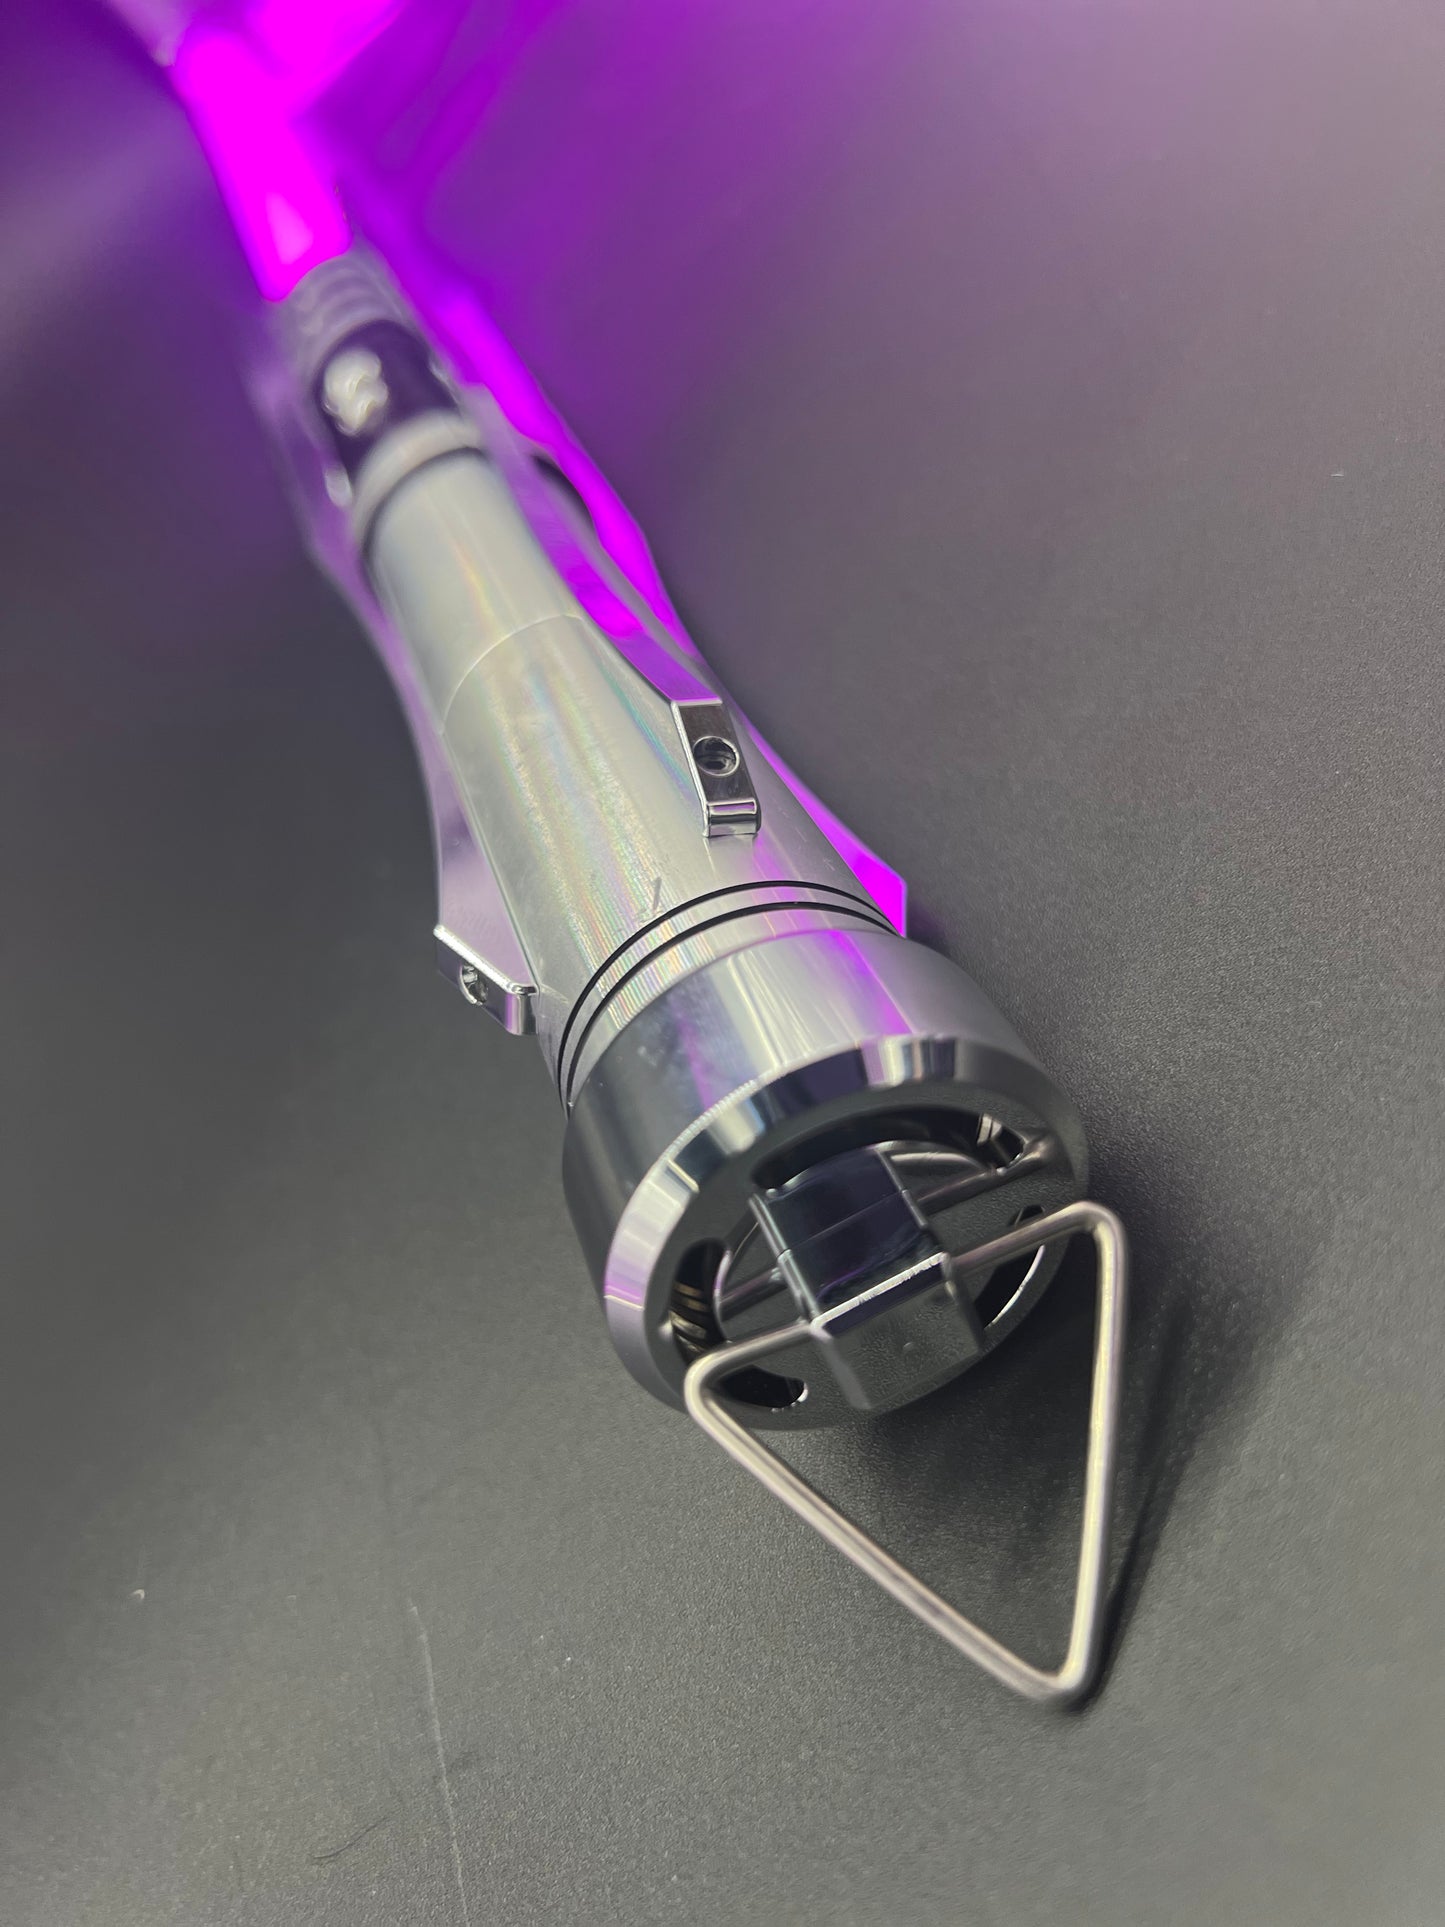 THE SHADOW OF REVAN LIGHTSABER